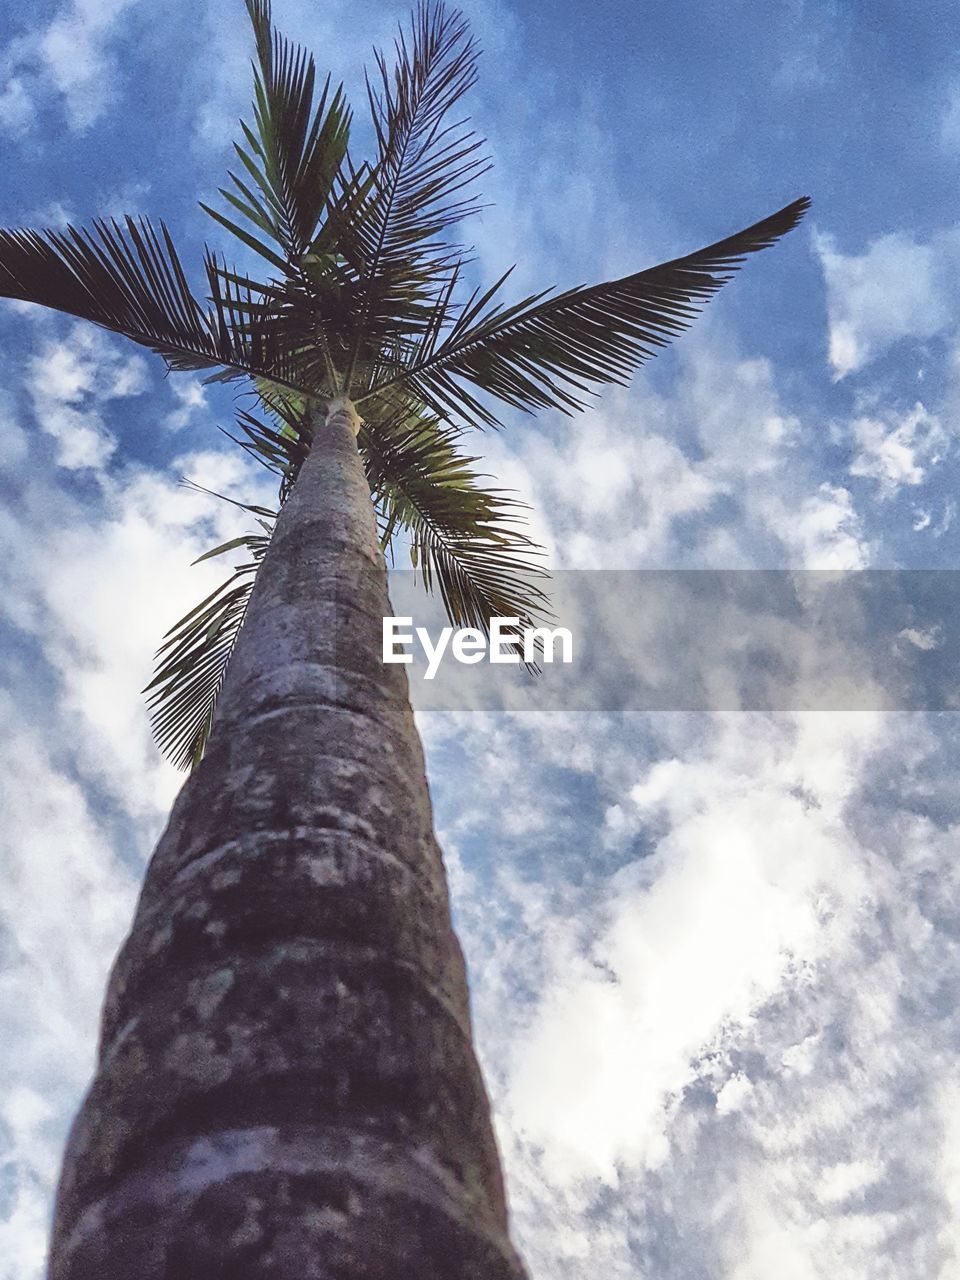 LOW ANGLE VIEW OF PALM TREE AGAINST CLOUDS